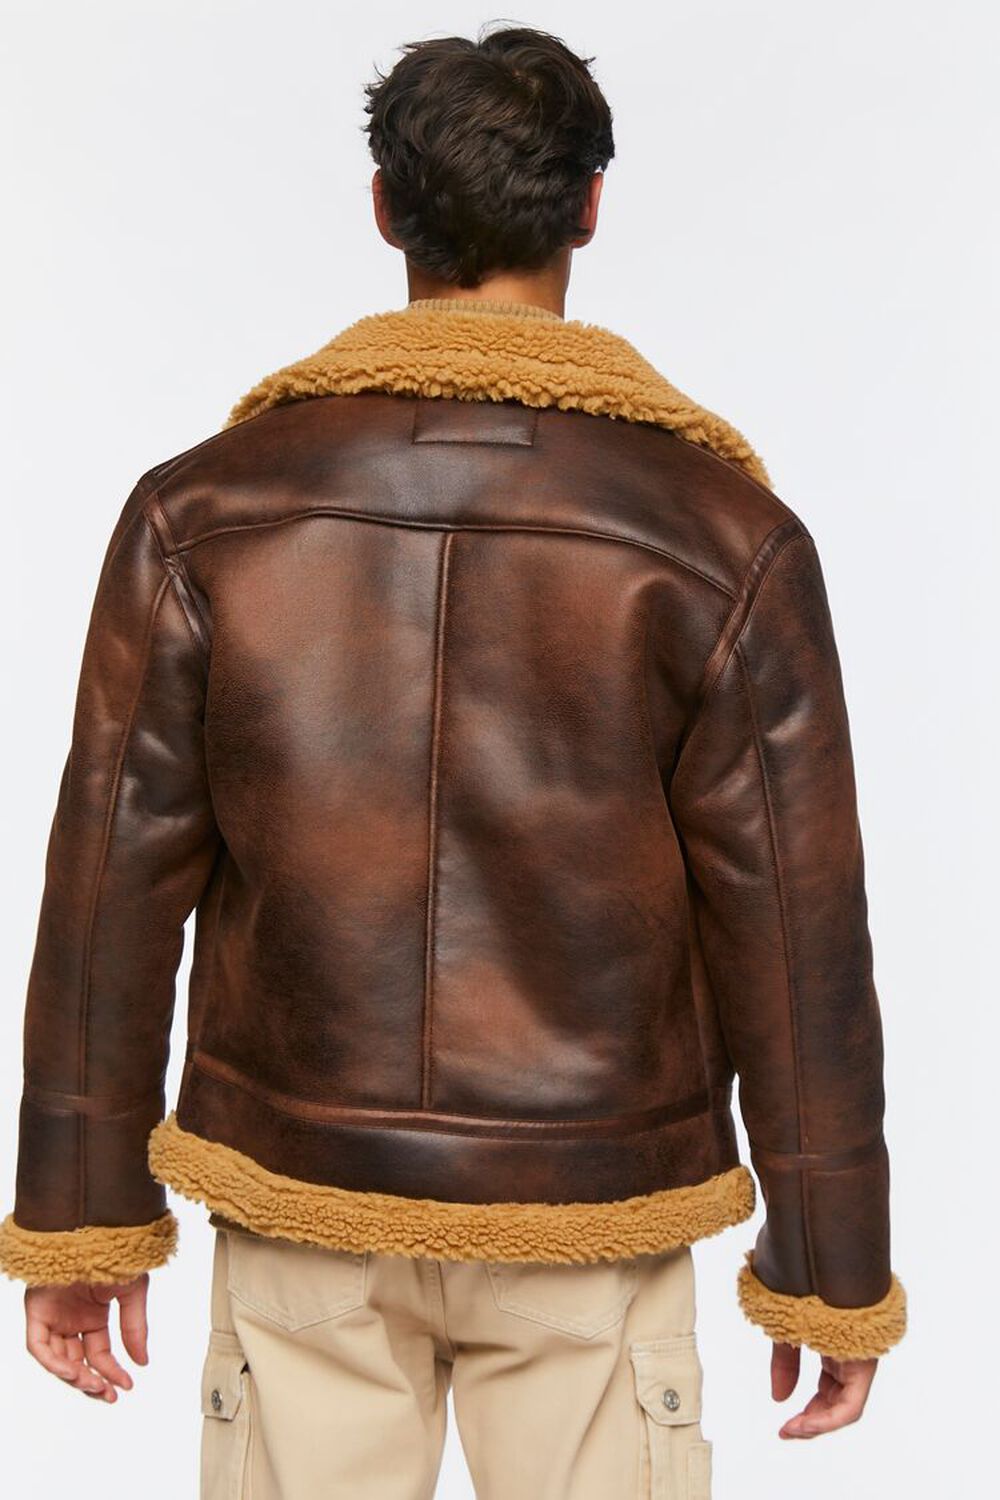 BROWN/TAUPE Faux Shearling Trim Zip-Up Jacket, image 3